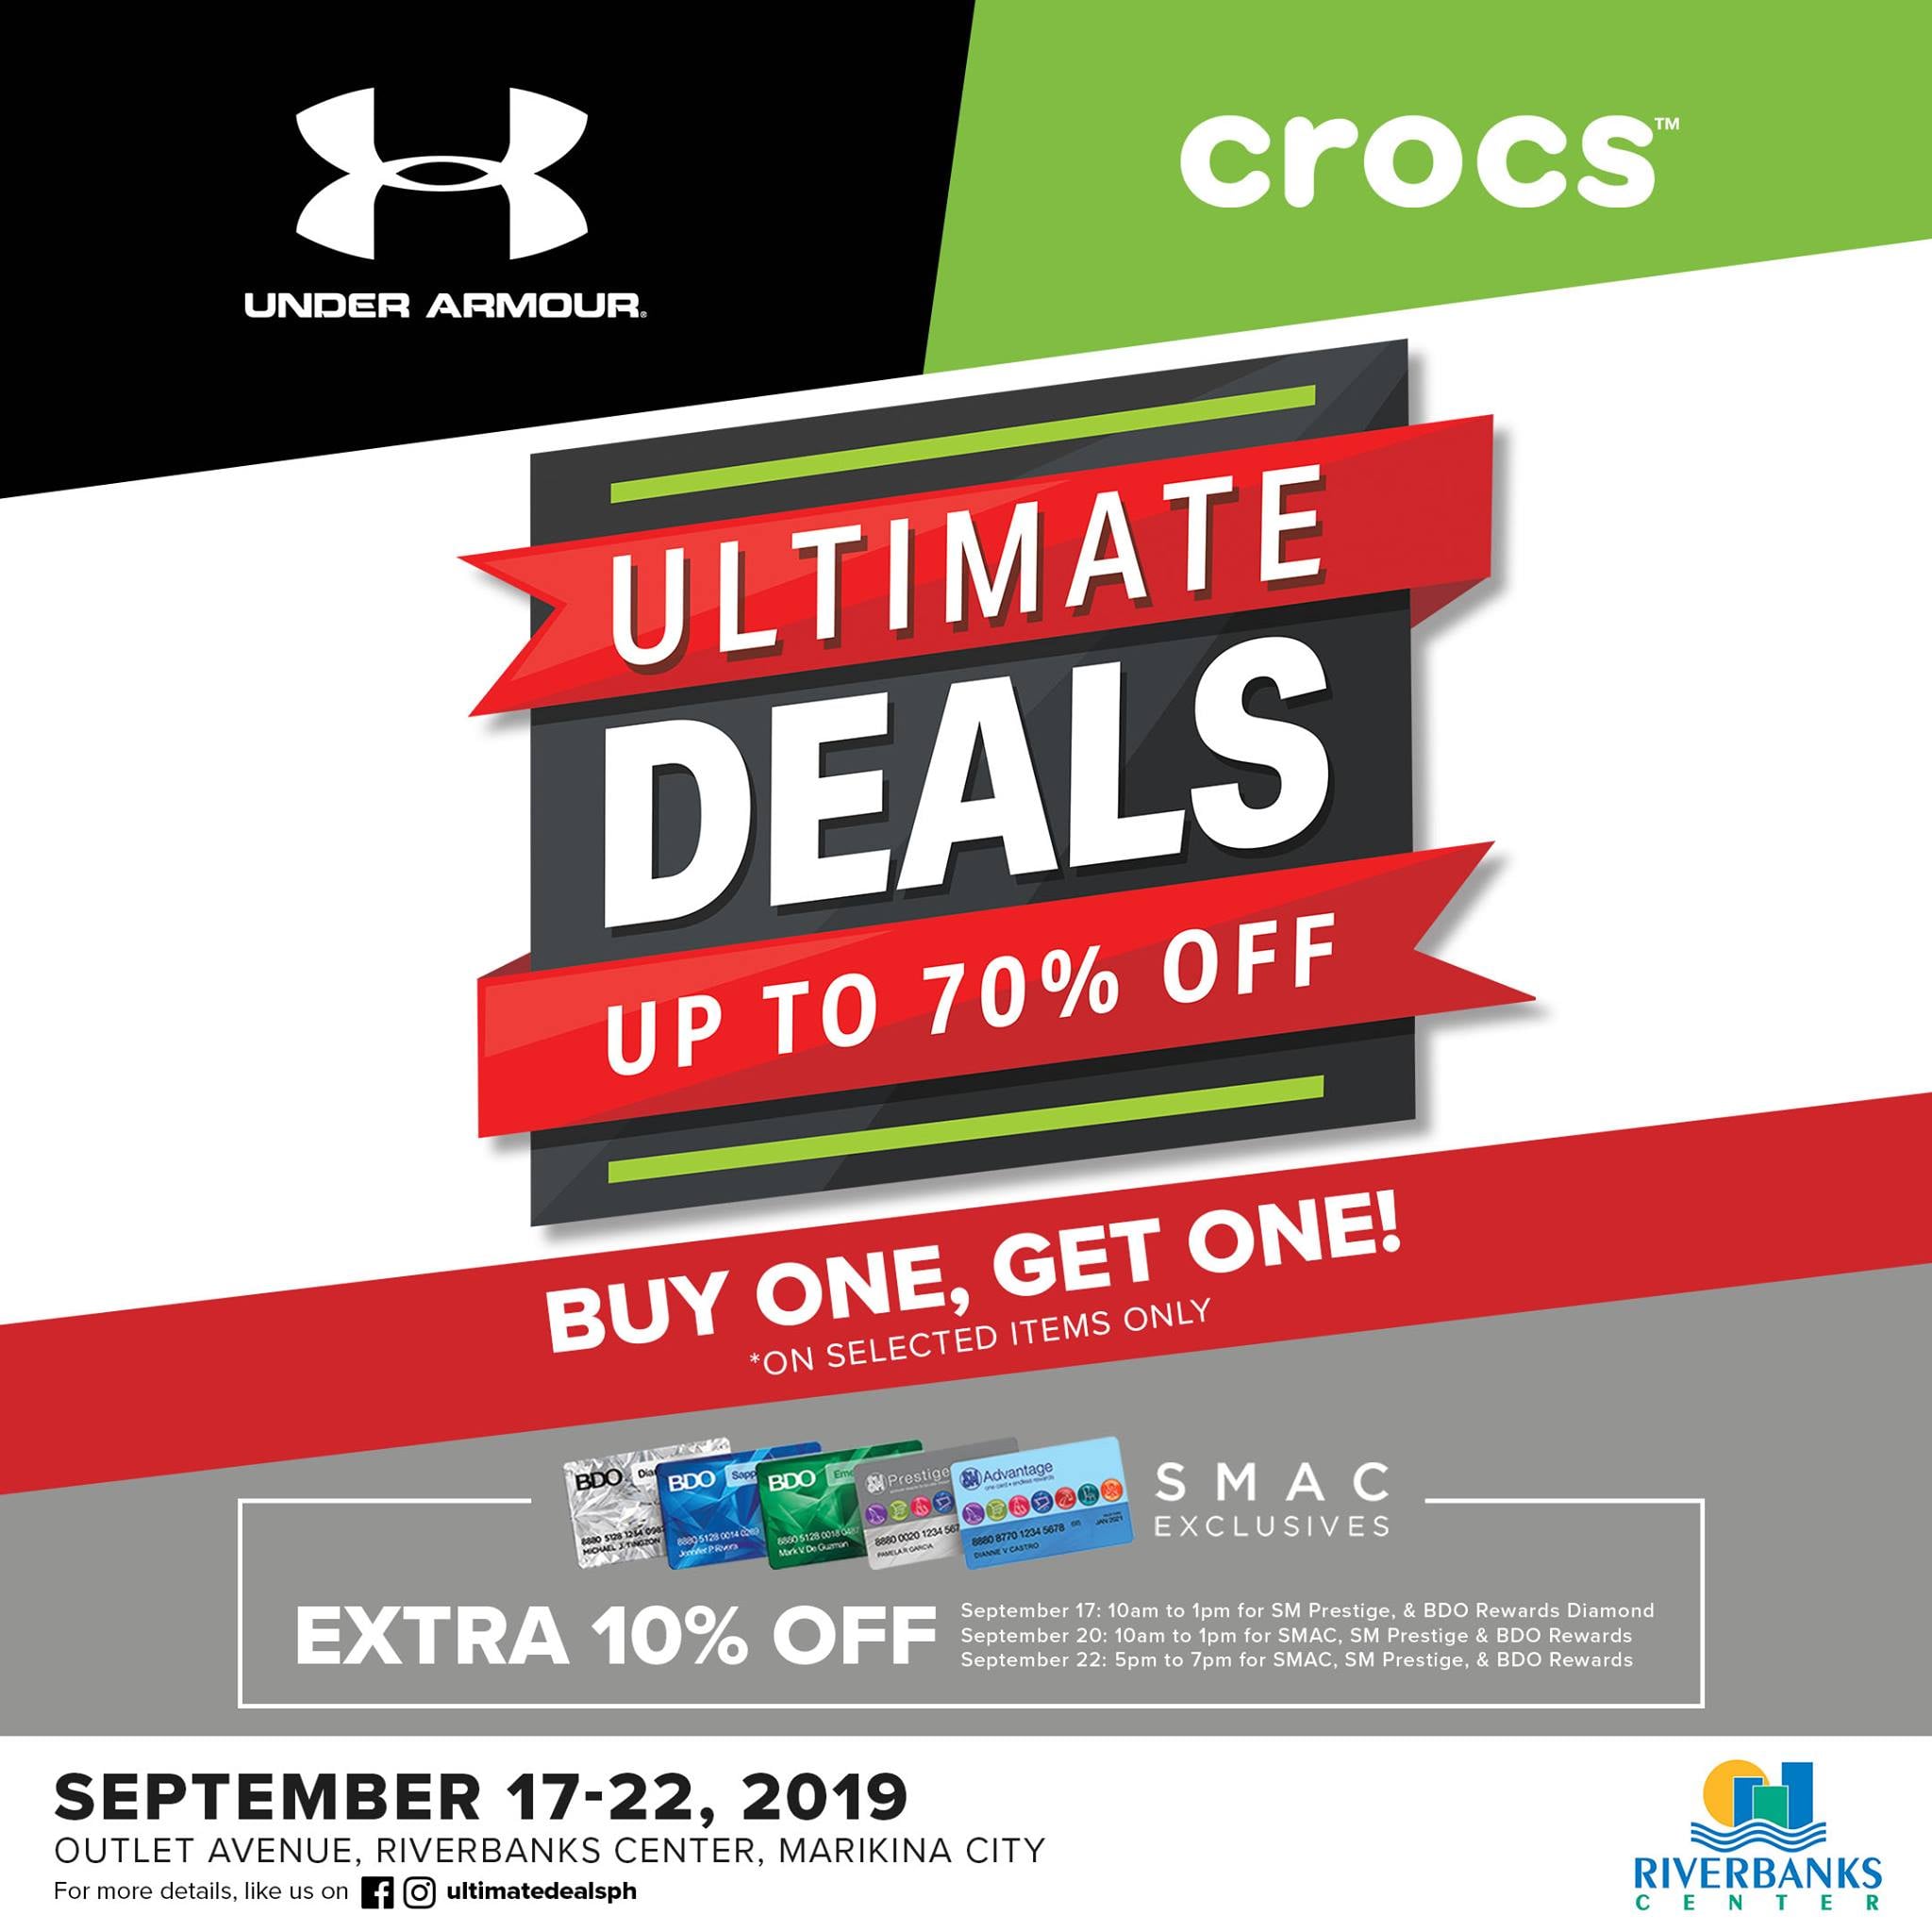 Under Armour and Crocs ULTIMATE DEALS